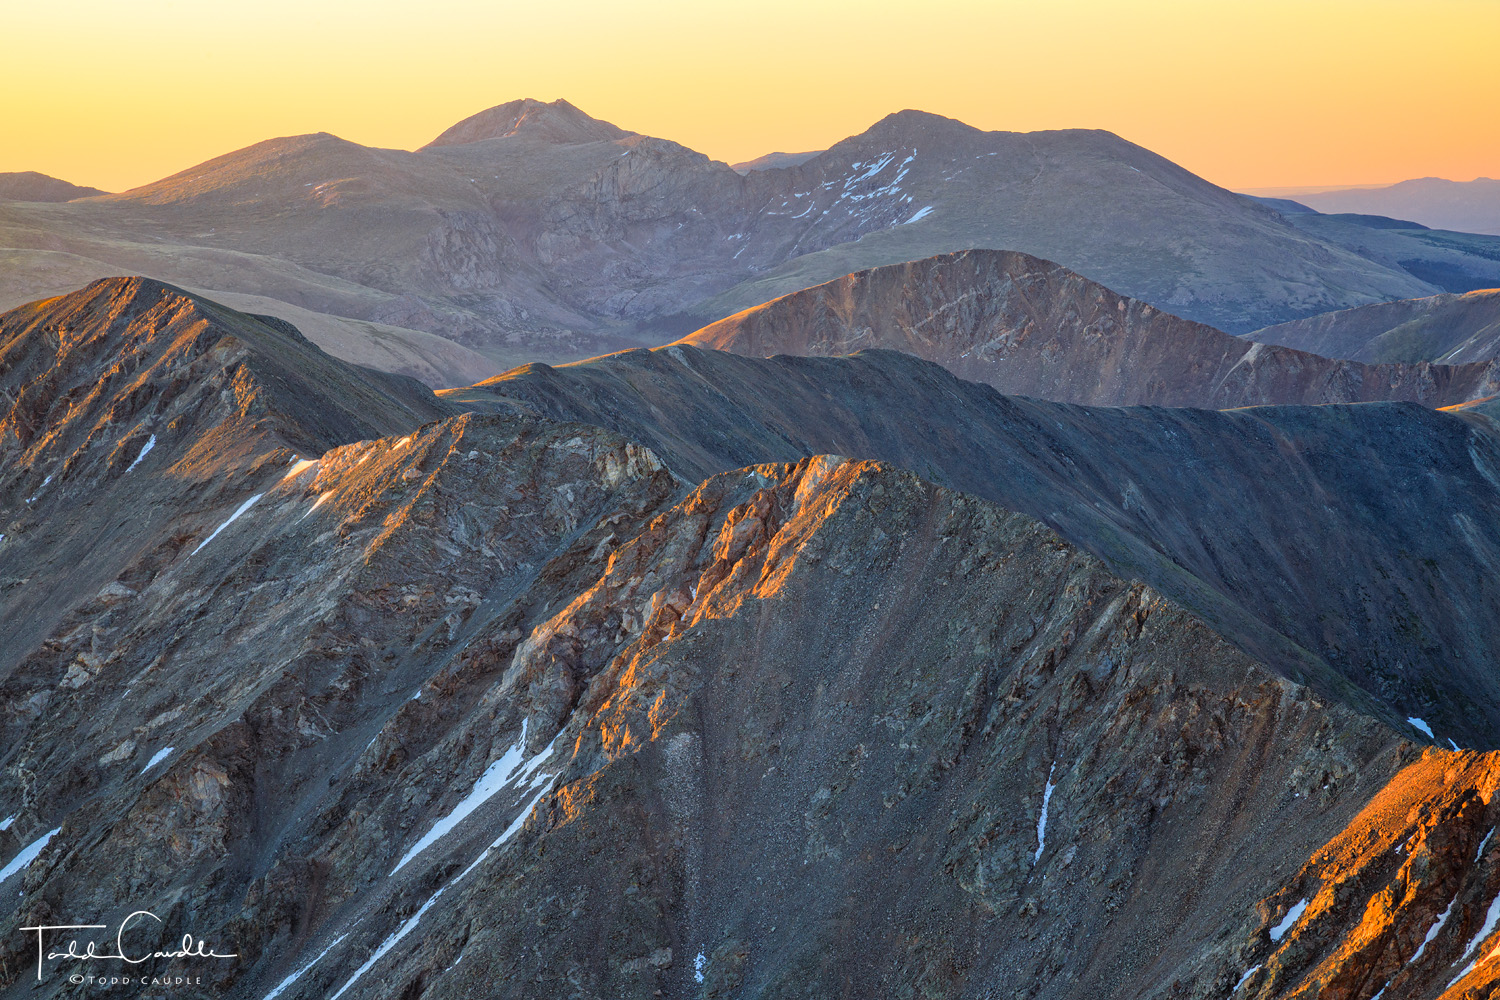 Rugged and rocky ridges lead to this sunrise view of two fourteener summits, Mount Evans & Mount Bierstadt, a visual reward for...